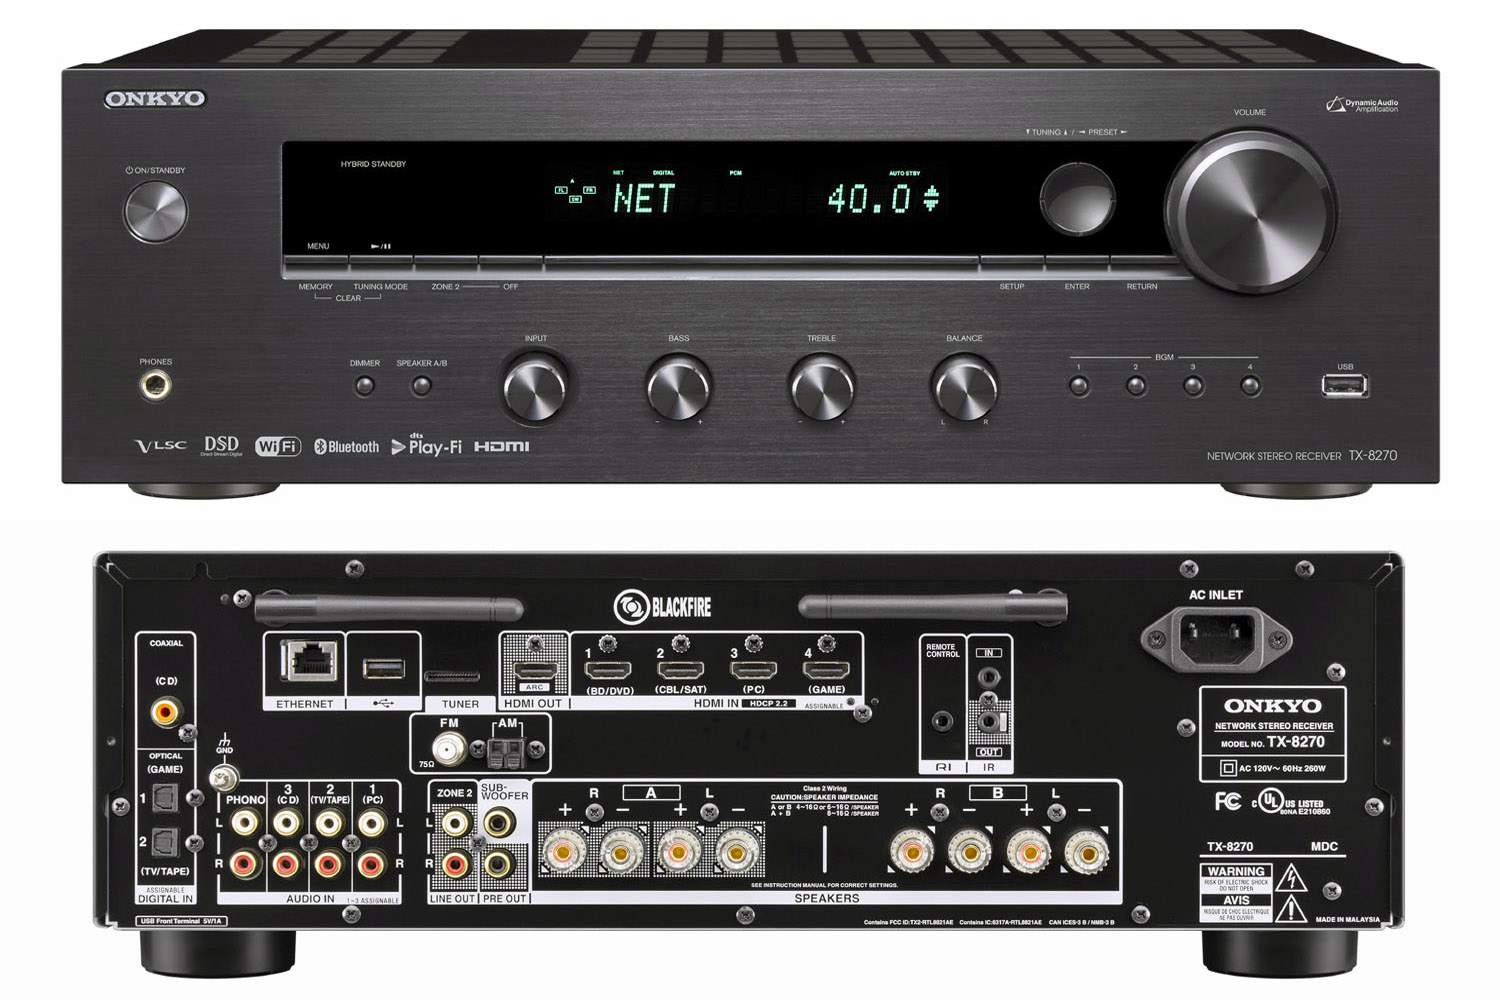 Onkyo TX-8270 Network Stereo Receiver: A Hub for Music Lovers